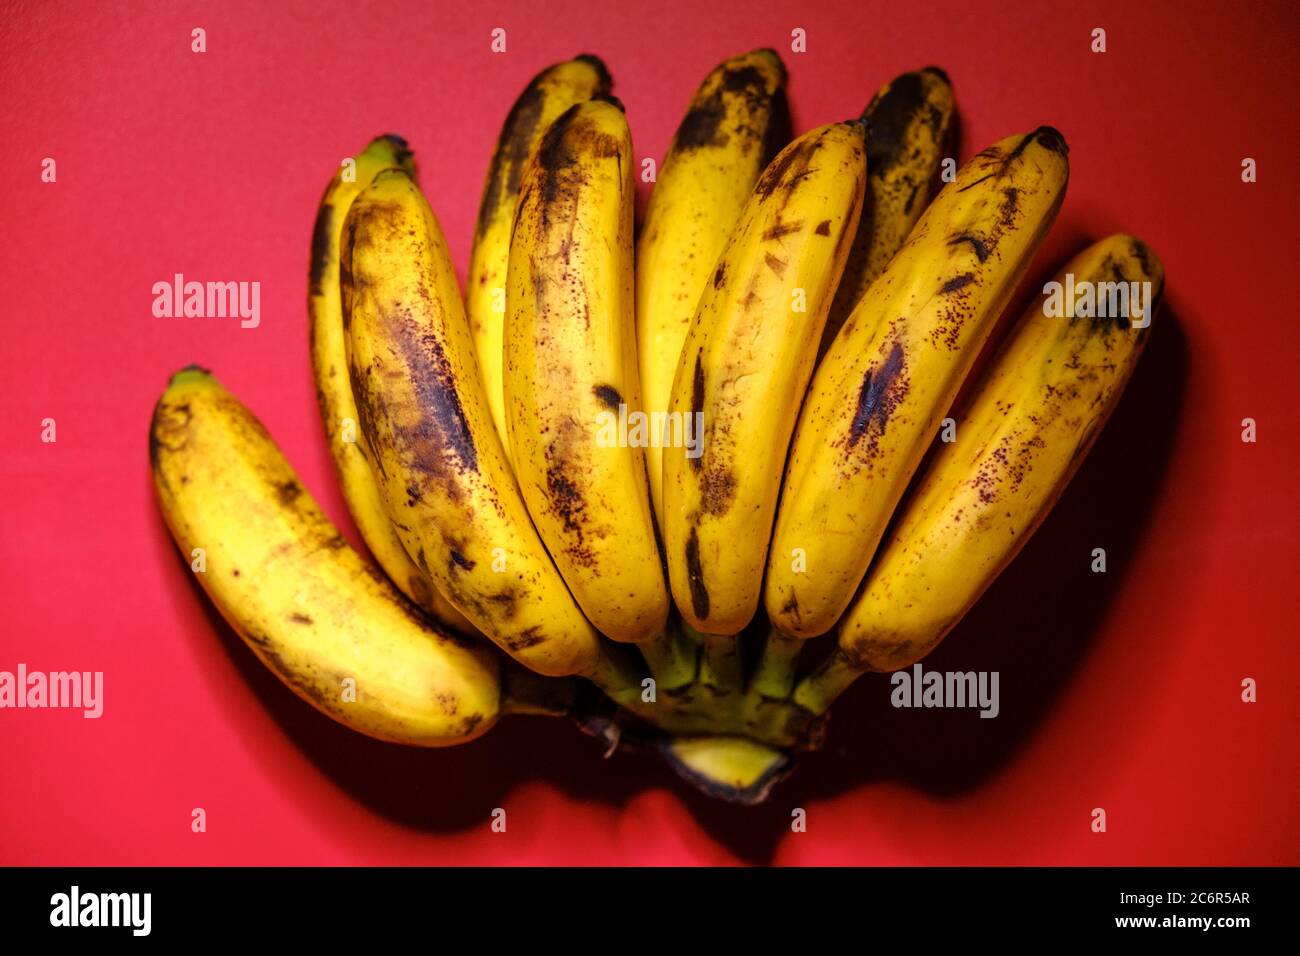 https://c8.alamy.com/comp/2C6R5AR/organic-bananas-on-red-background-top-view-bunch-of-bananas-is-lying-on-orange-background-with-dark-spots-marking-ripening-process-2C6R5AR.jpg